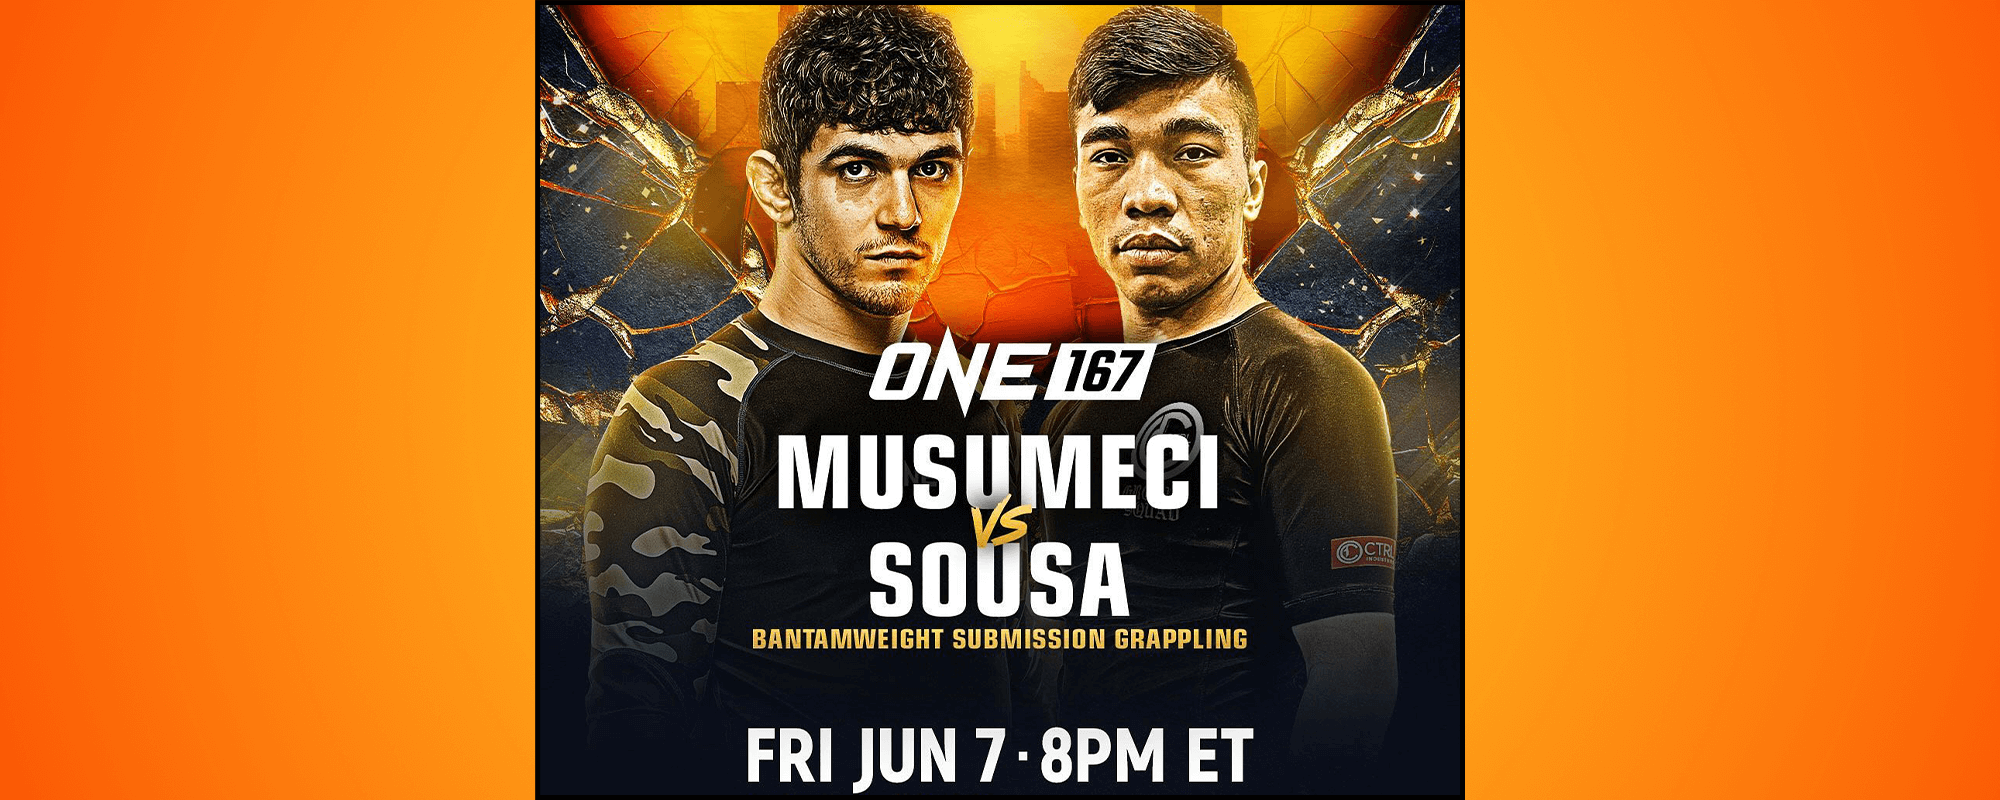 Mikey Musumeci vs Gabriel Sousa Rematch Booked For ONE 167 